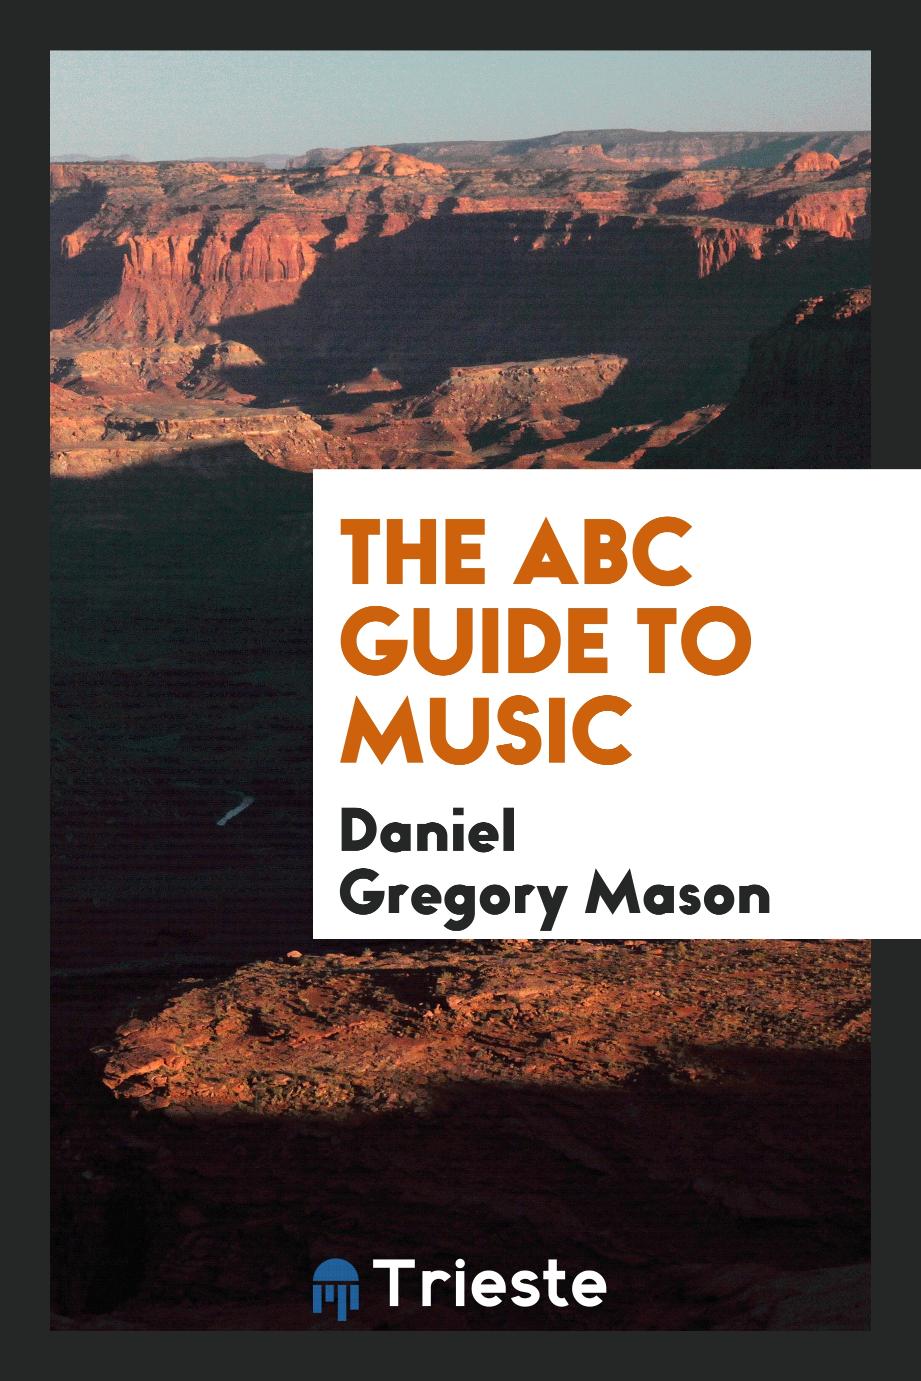 The ABC guide to music